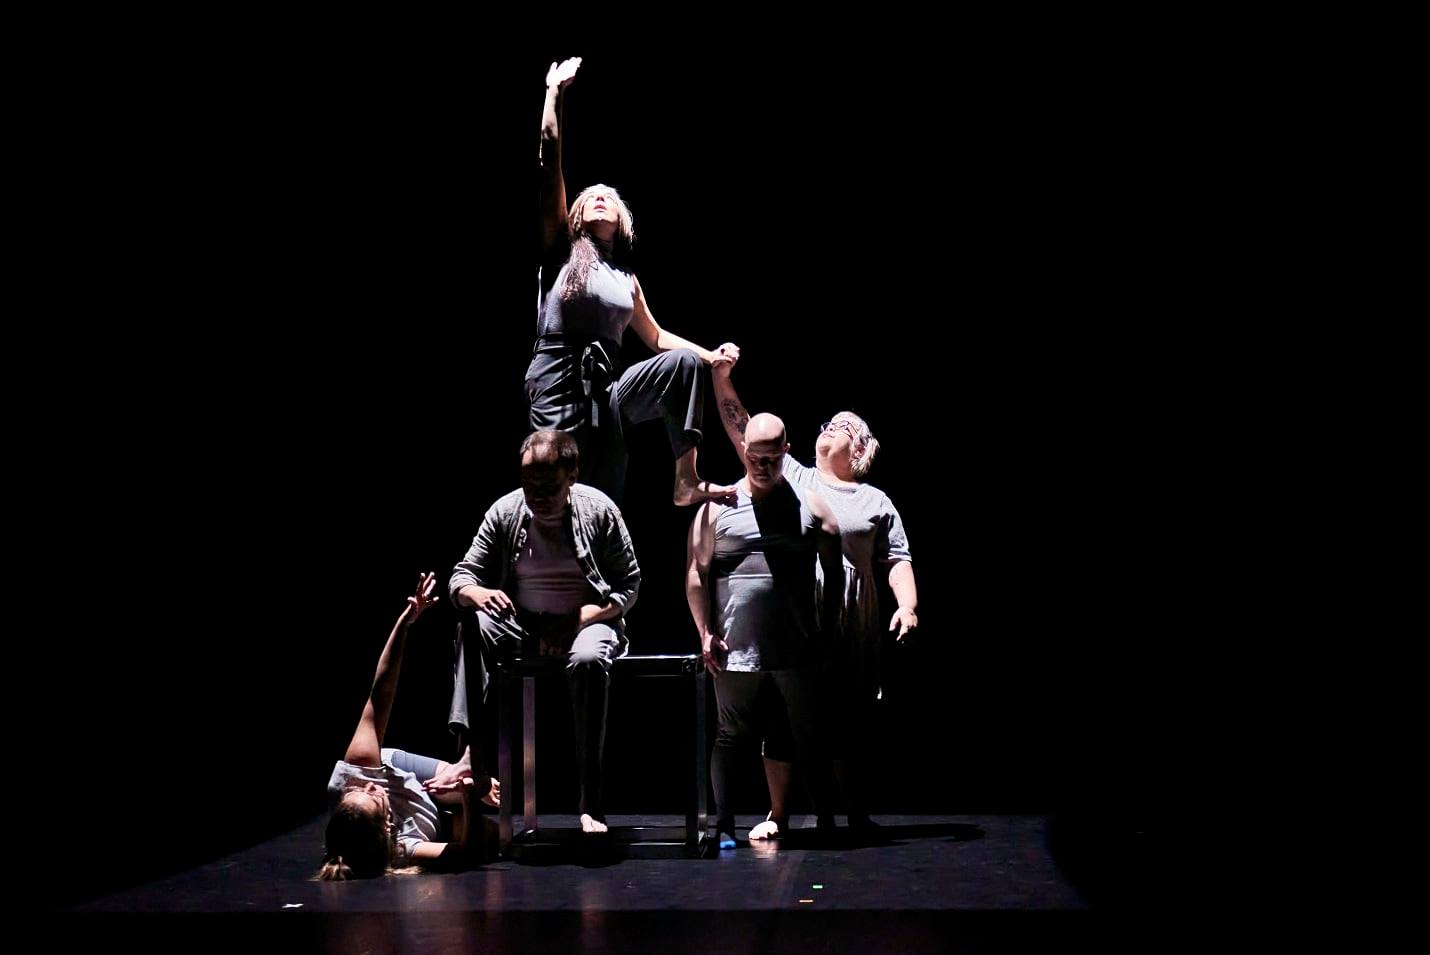 Several people creating a human pyramid on a theatre stage on a black background